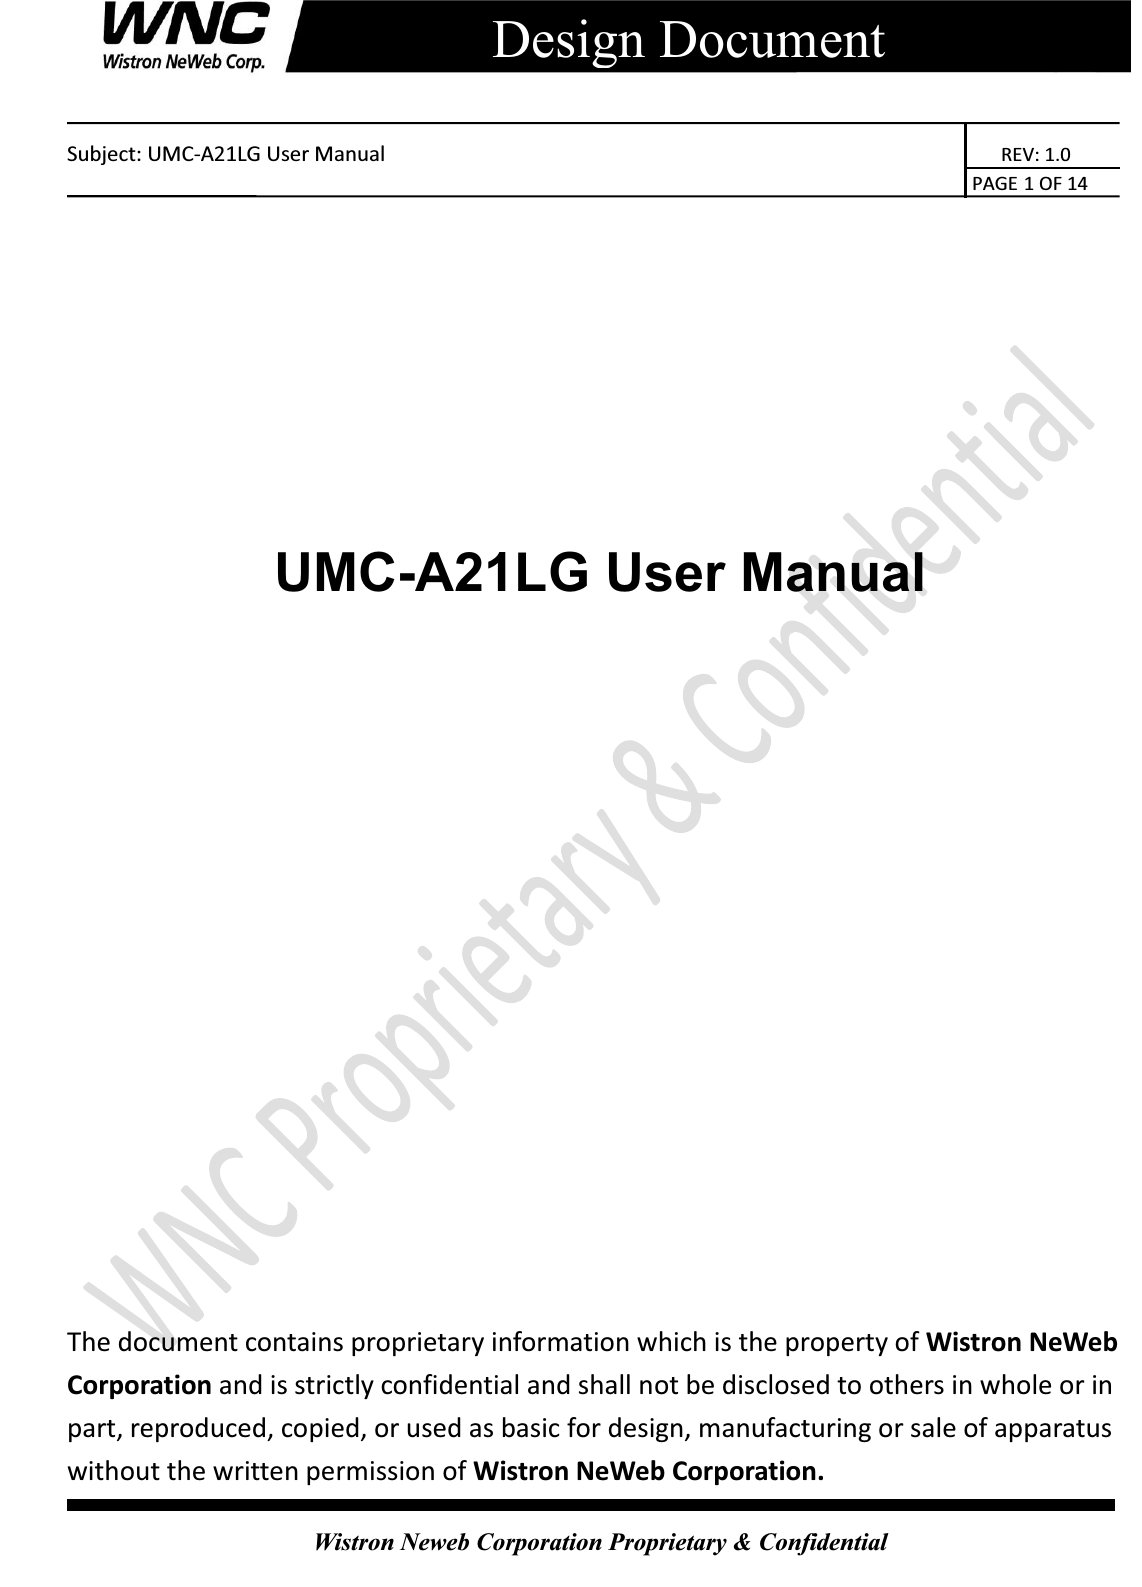    Subject: UMC-A21LG User Manual                                                          REV: 1.0                                                                                        PAGE 1 OF 14  Wistron Neweb Corporation Proprietary &amp; Confidential     Design Document          UMC-A21LG User Manual                    The document contains proprietary information which is the property of Wistron NeWeb Corporation and is strictly confidential and shall not be disclosed to others in whole or in part, reproduced, copied, or used as basic for design, manufacturing or sale of apparatus without the written permission of Wistron NeWeb Corporation. 